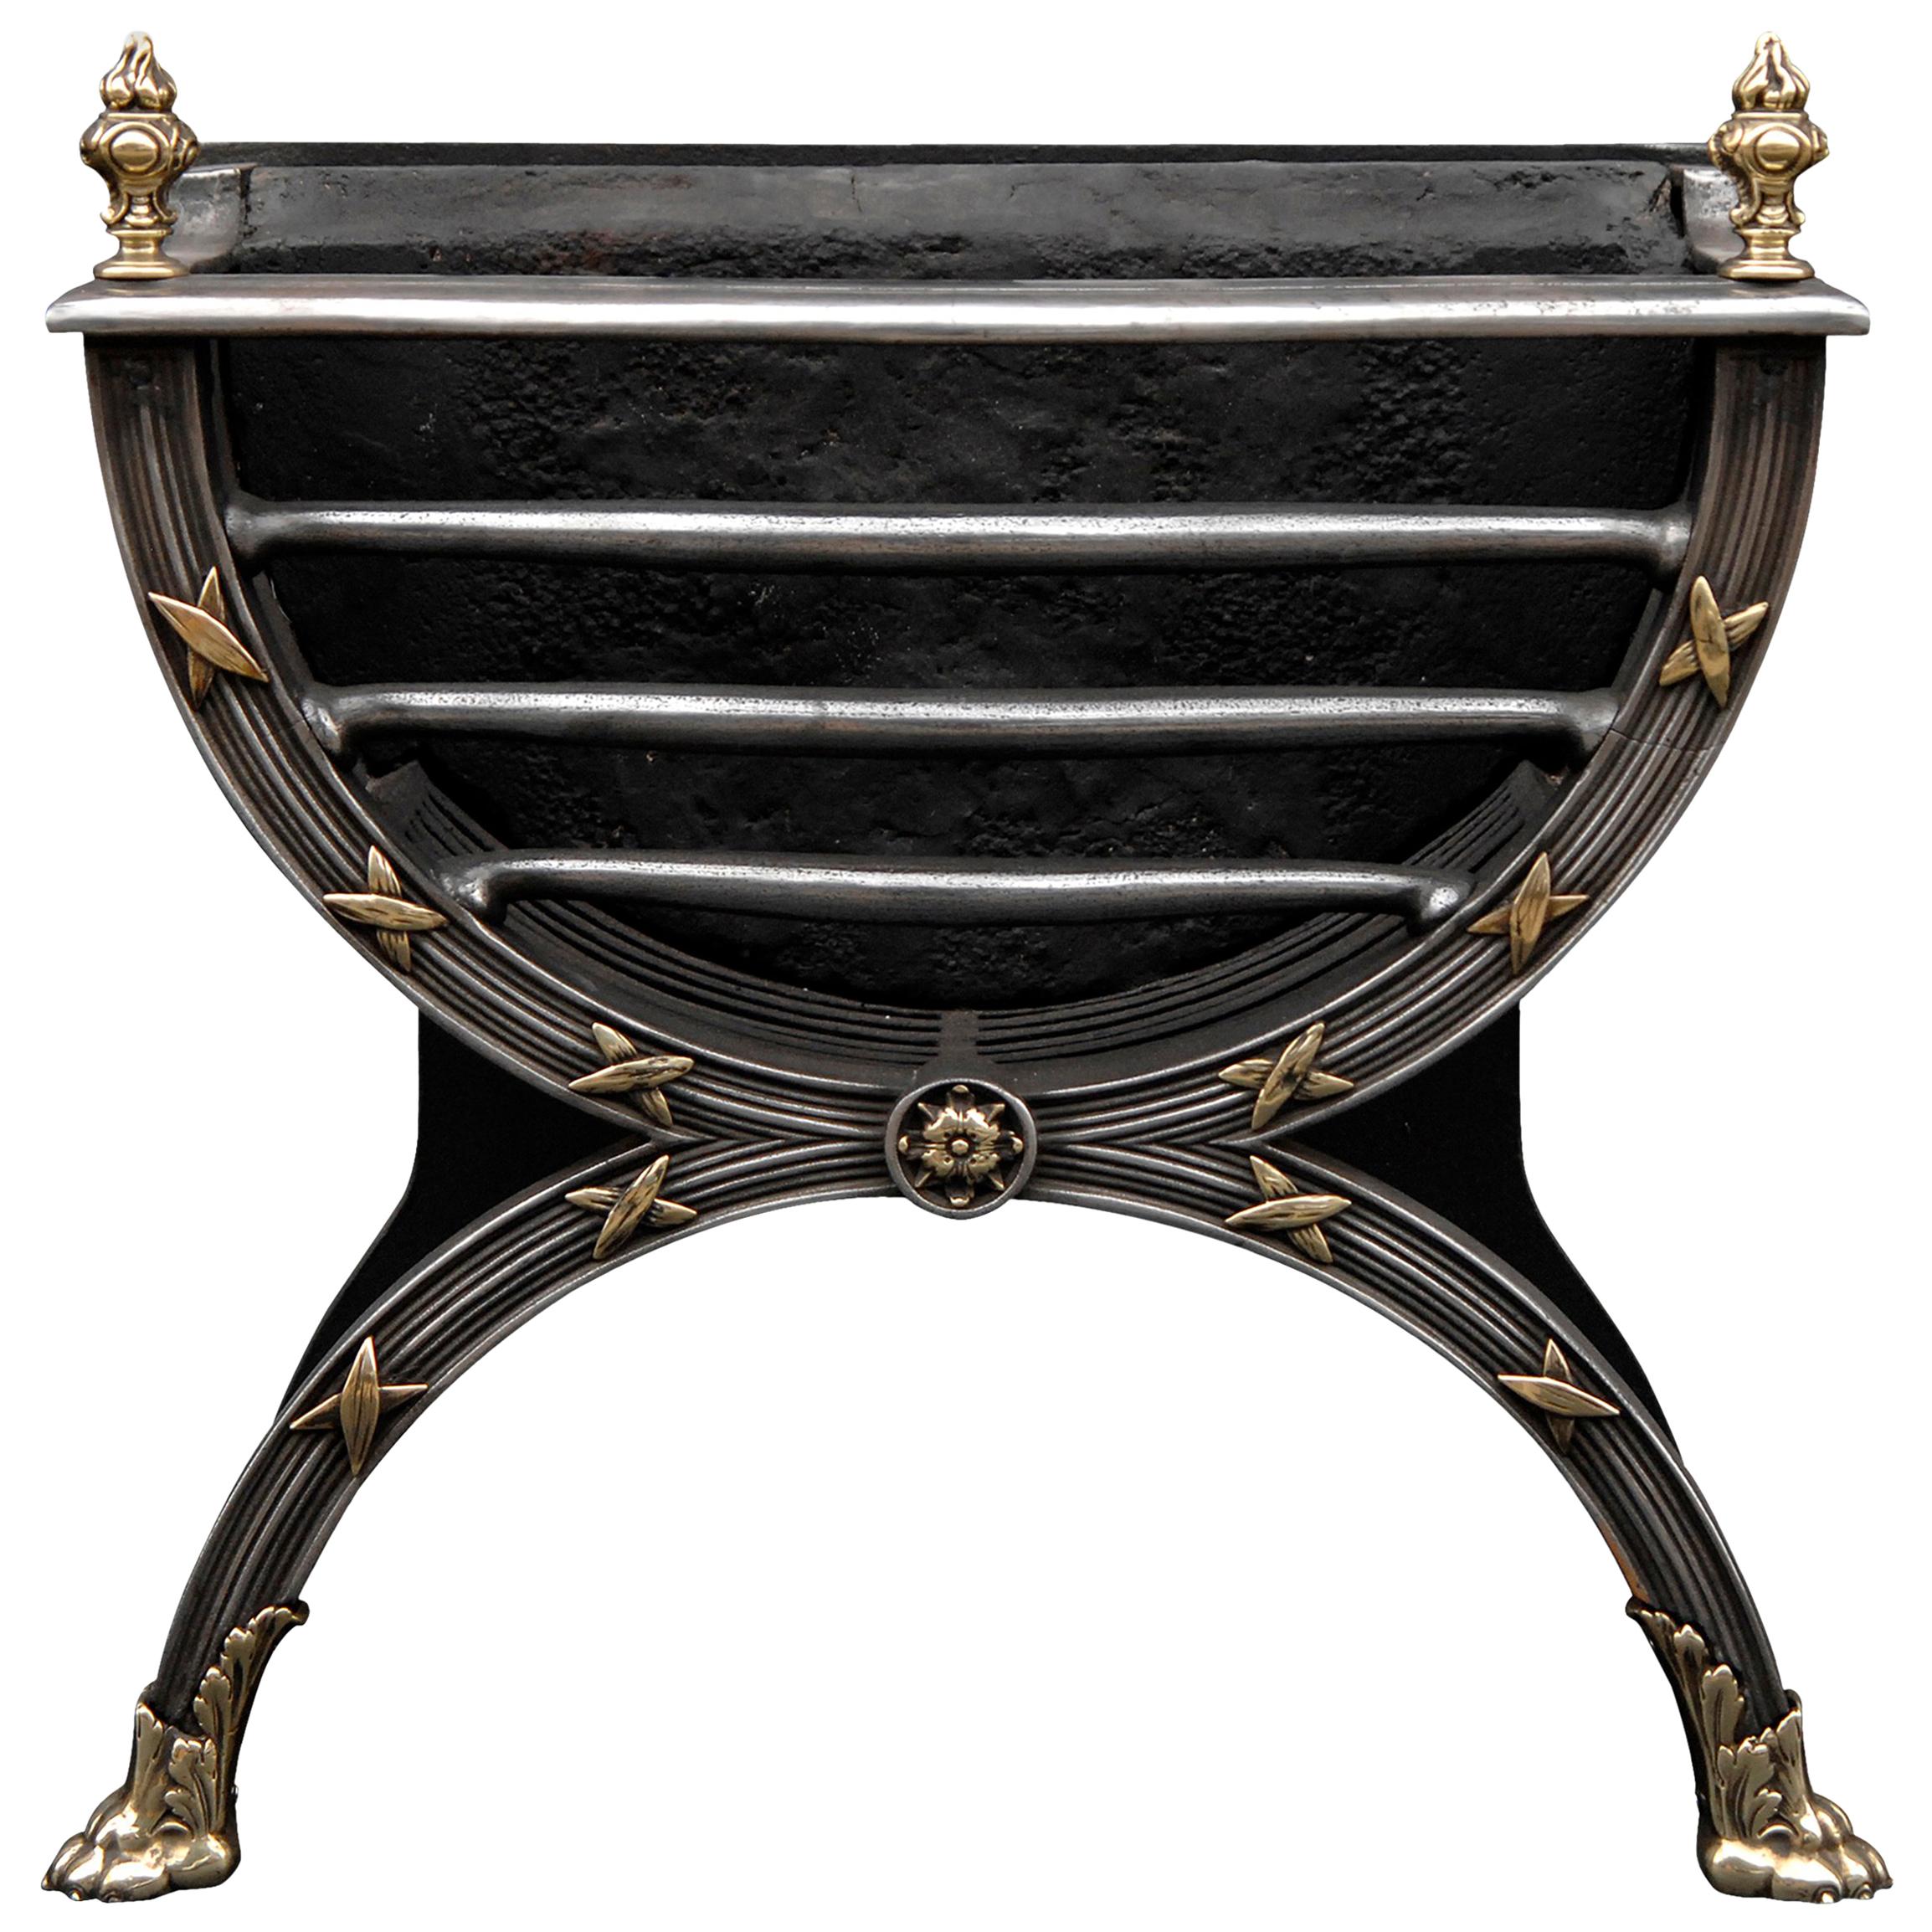 Elegant Regency Style Polished Cast Iron and Brass Fire Grate